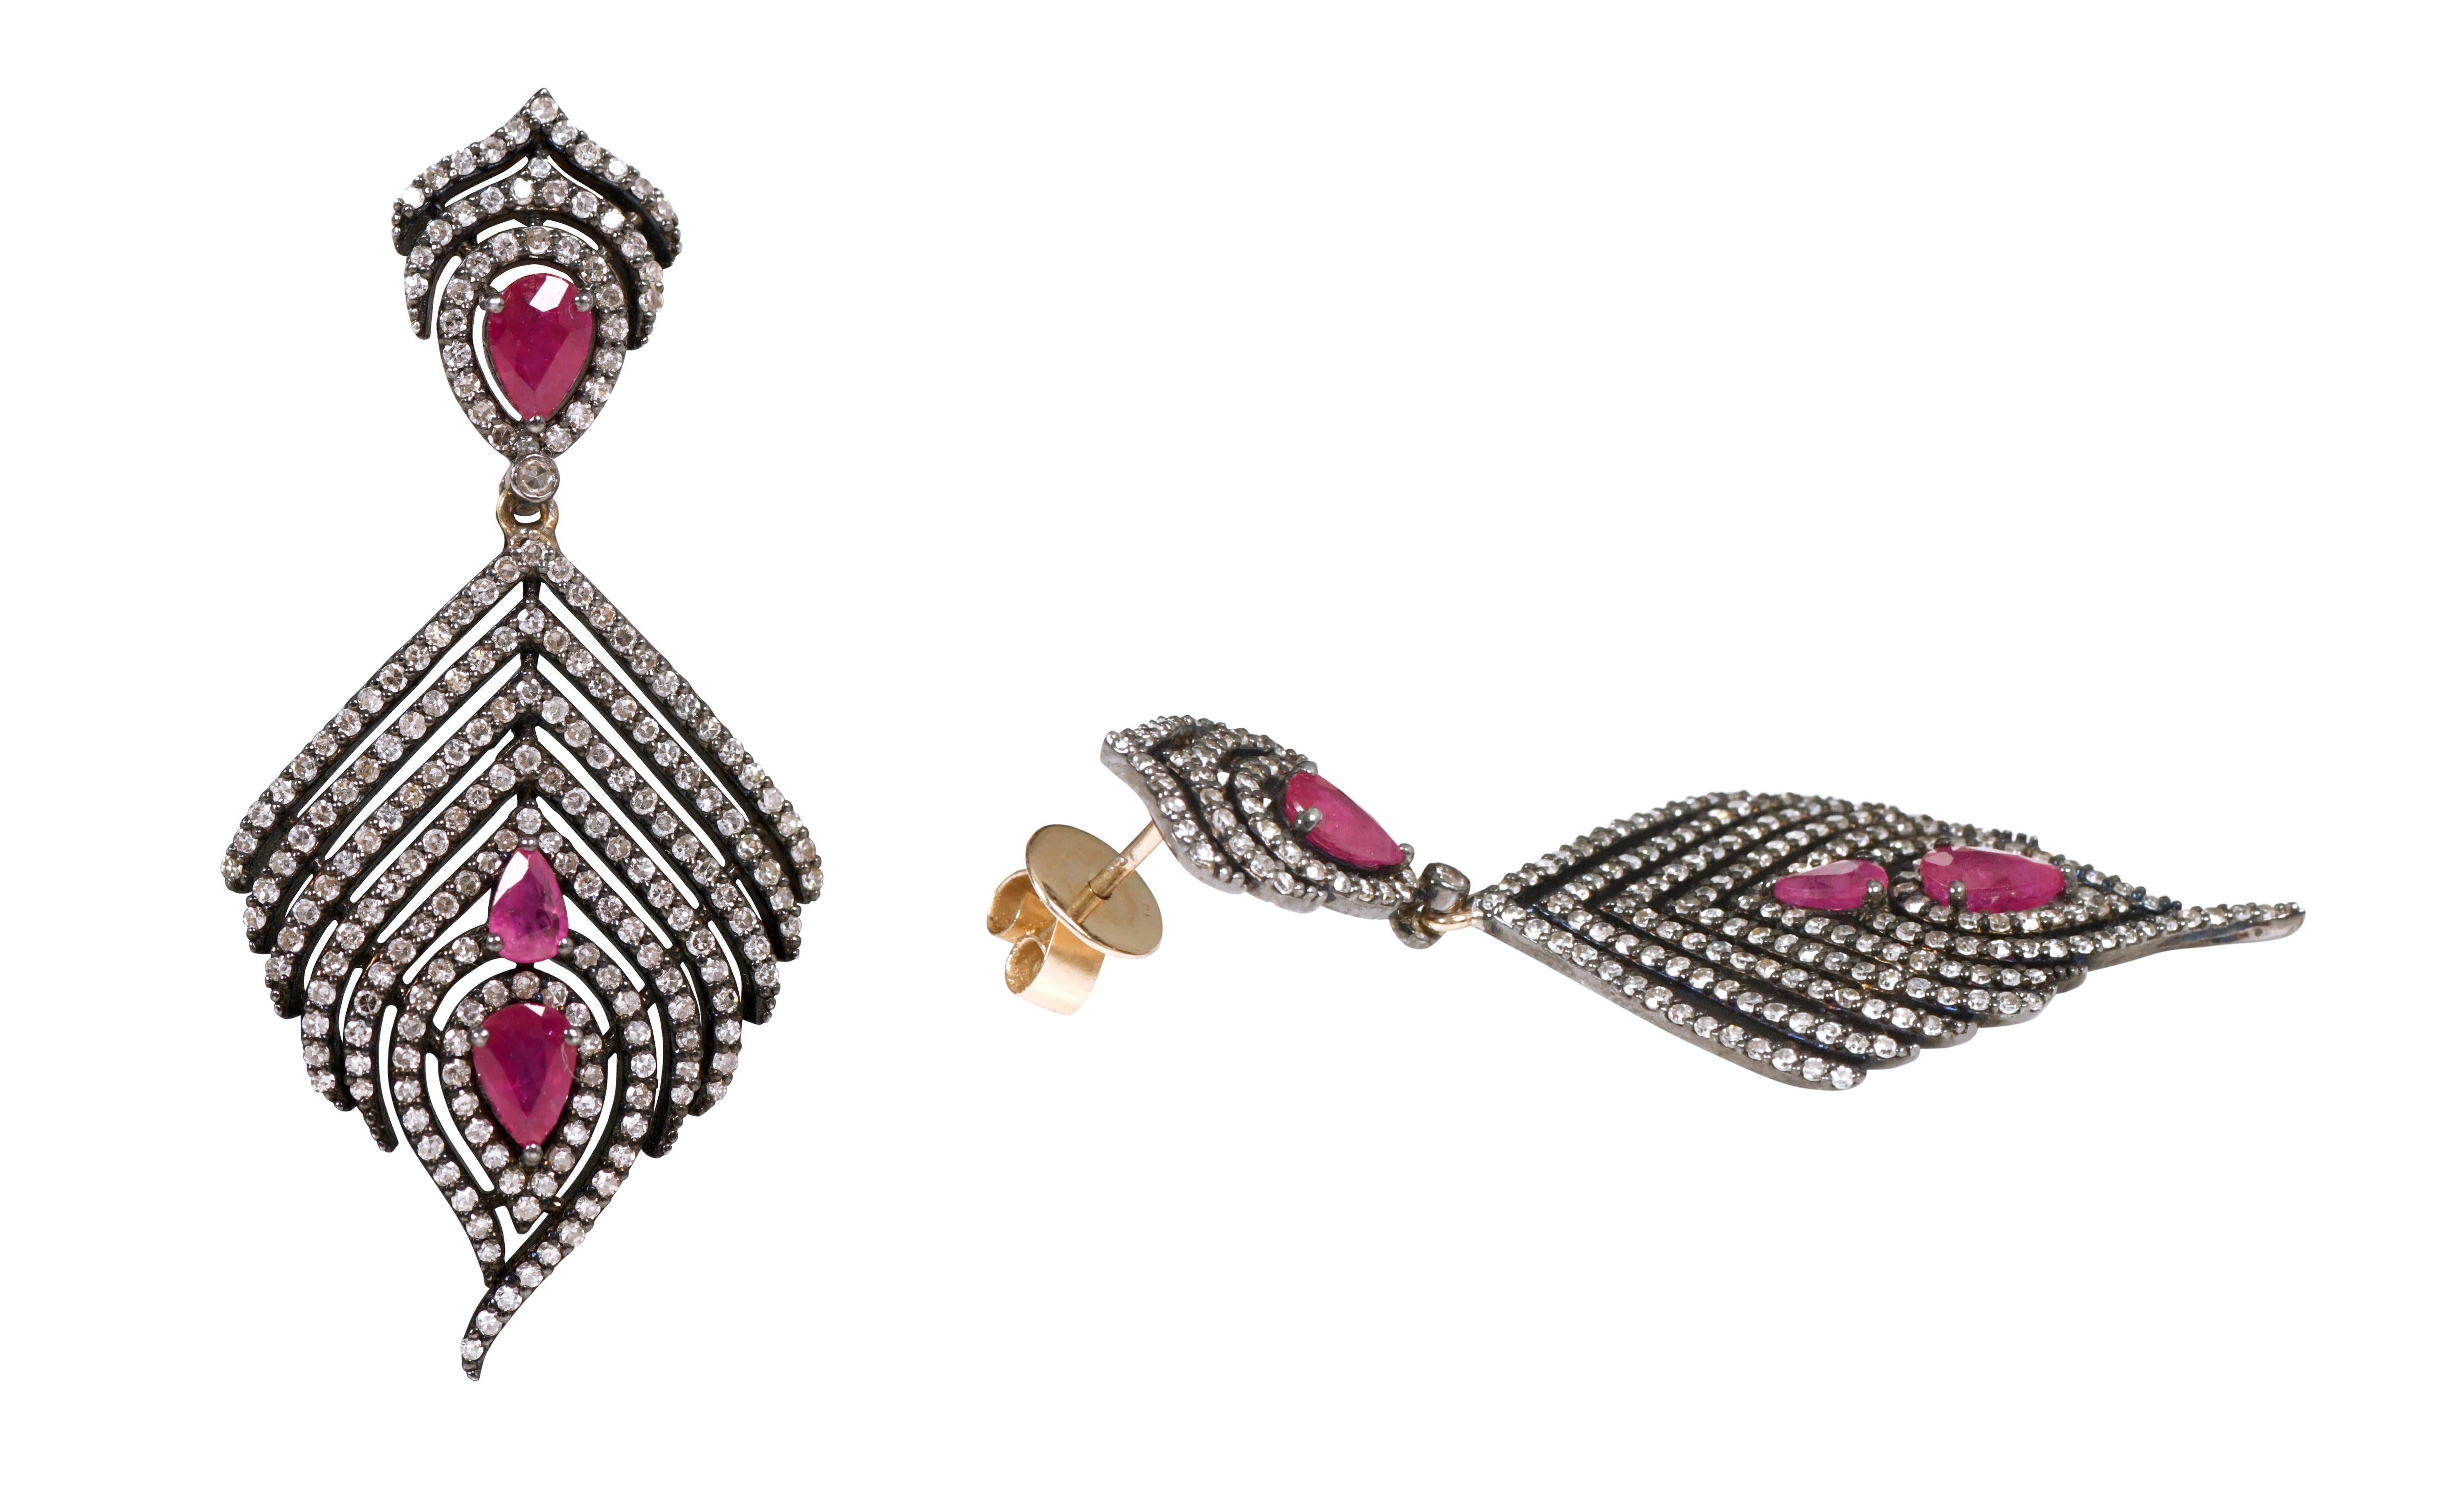 5.12 Carat Ruby and Diamond Drop Earrings in Victorian Style

This Victorian period immersive art-deco style wine red ruby and diamond long feathery earring is glorious. The bottom comprehensive feather design with pave set round diamond in the